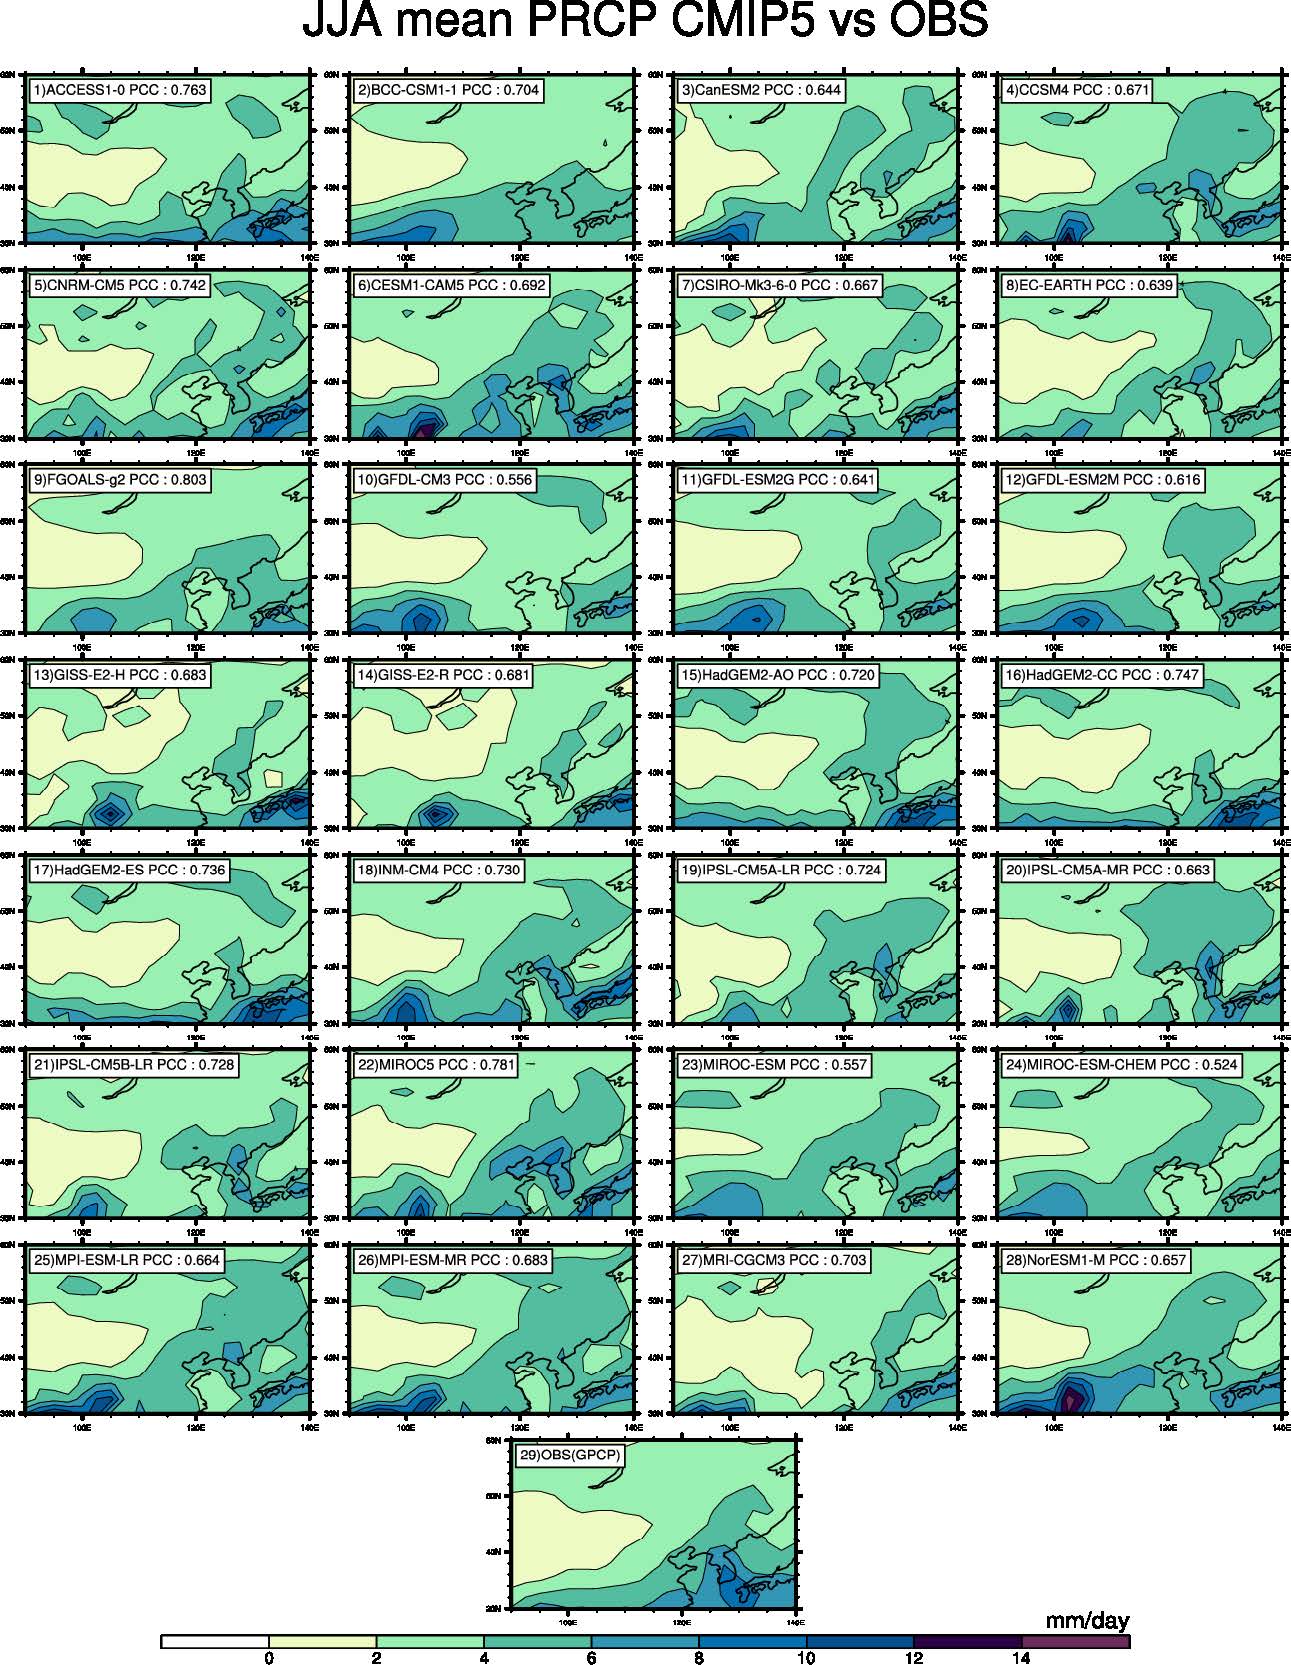 Figure 4 Summer mean precipitation for (1)-(28) each CMIP5 model and (29) OBS over the East Asian monsoon region from 1979 to 2005 (27 years). The PCC between each model and OBS is shown in each panel